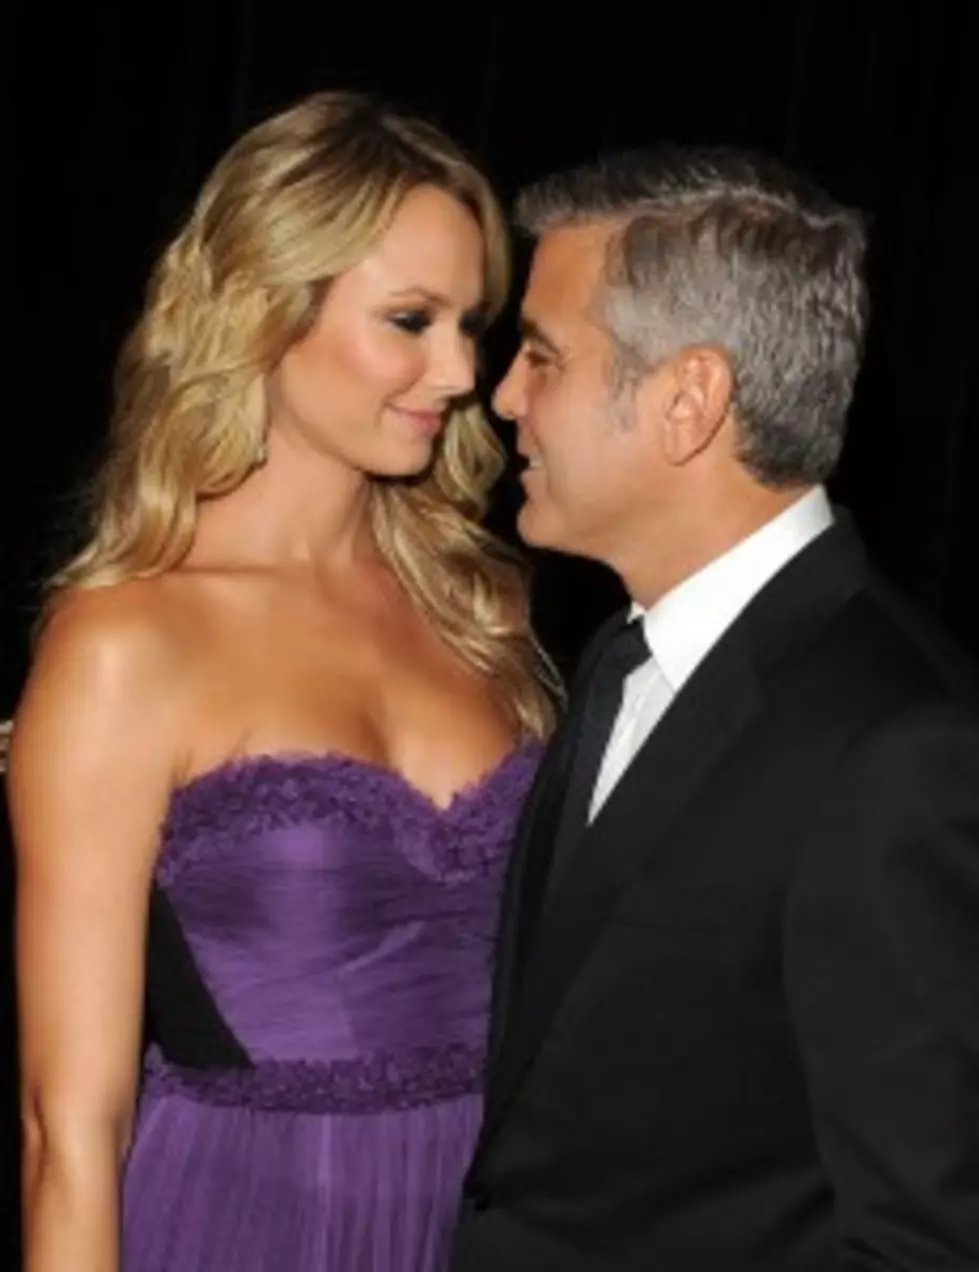 George Clooney Opens Up About His Relationship With Stacy Keibler